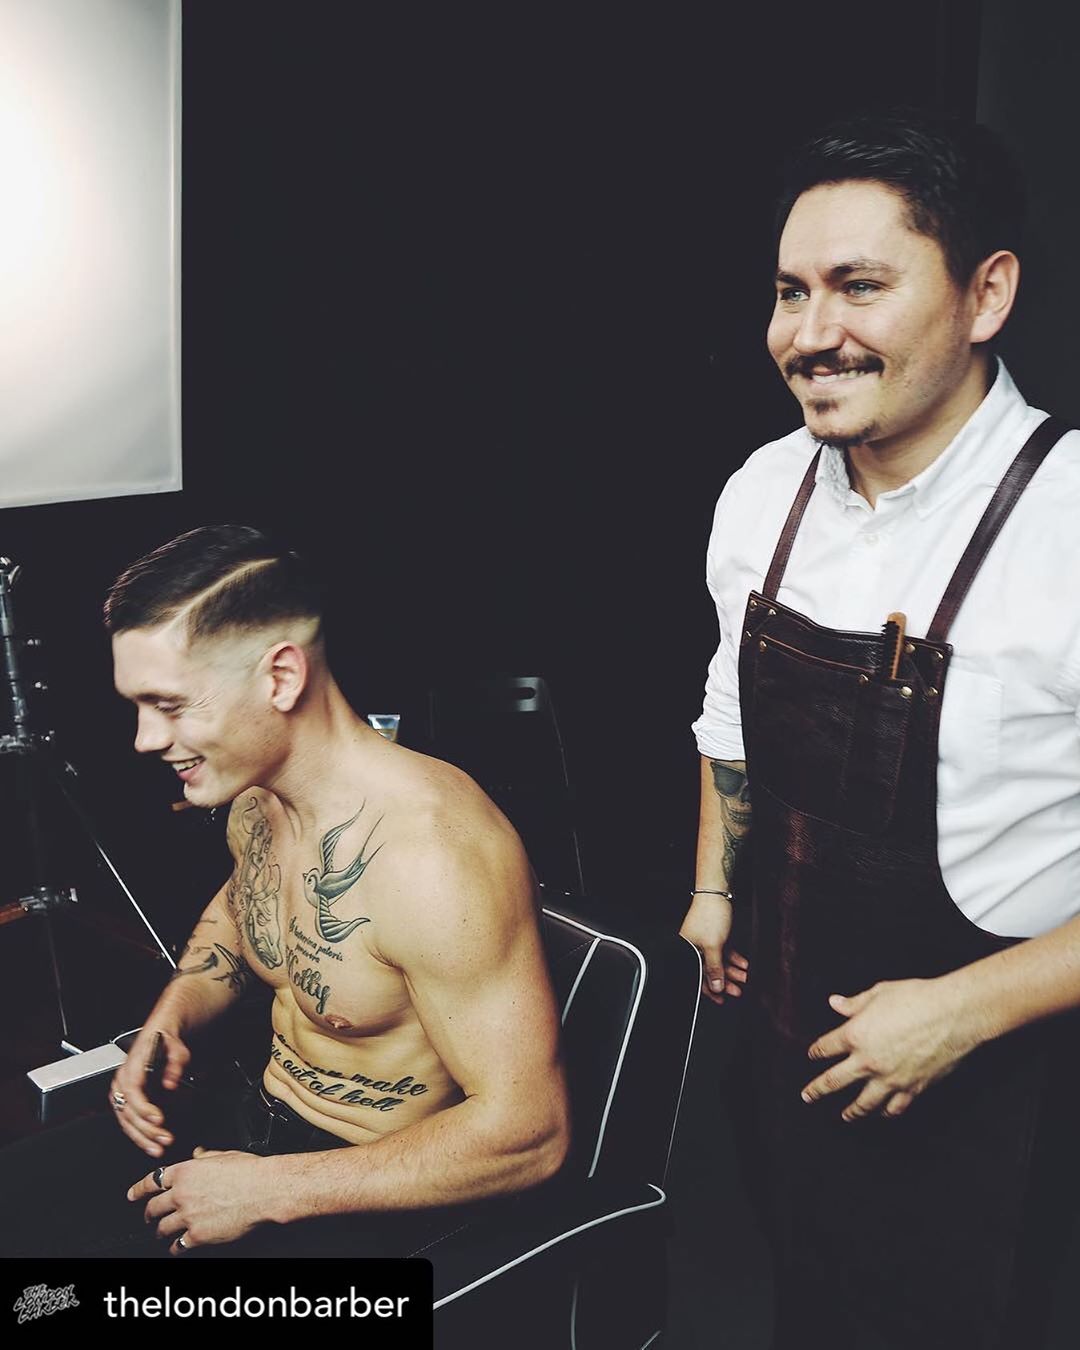 'the best aprons on earth' - The London Barber